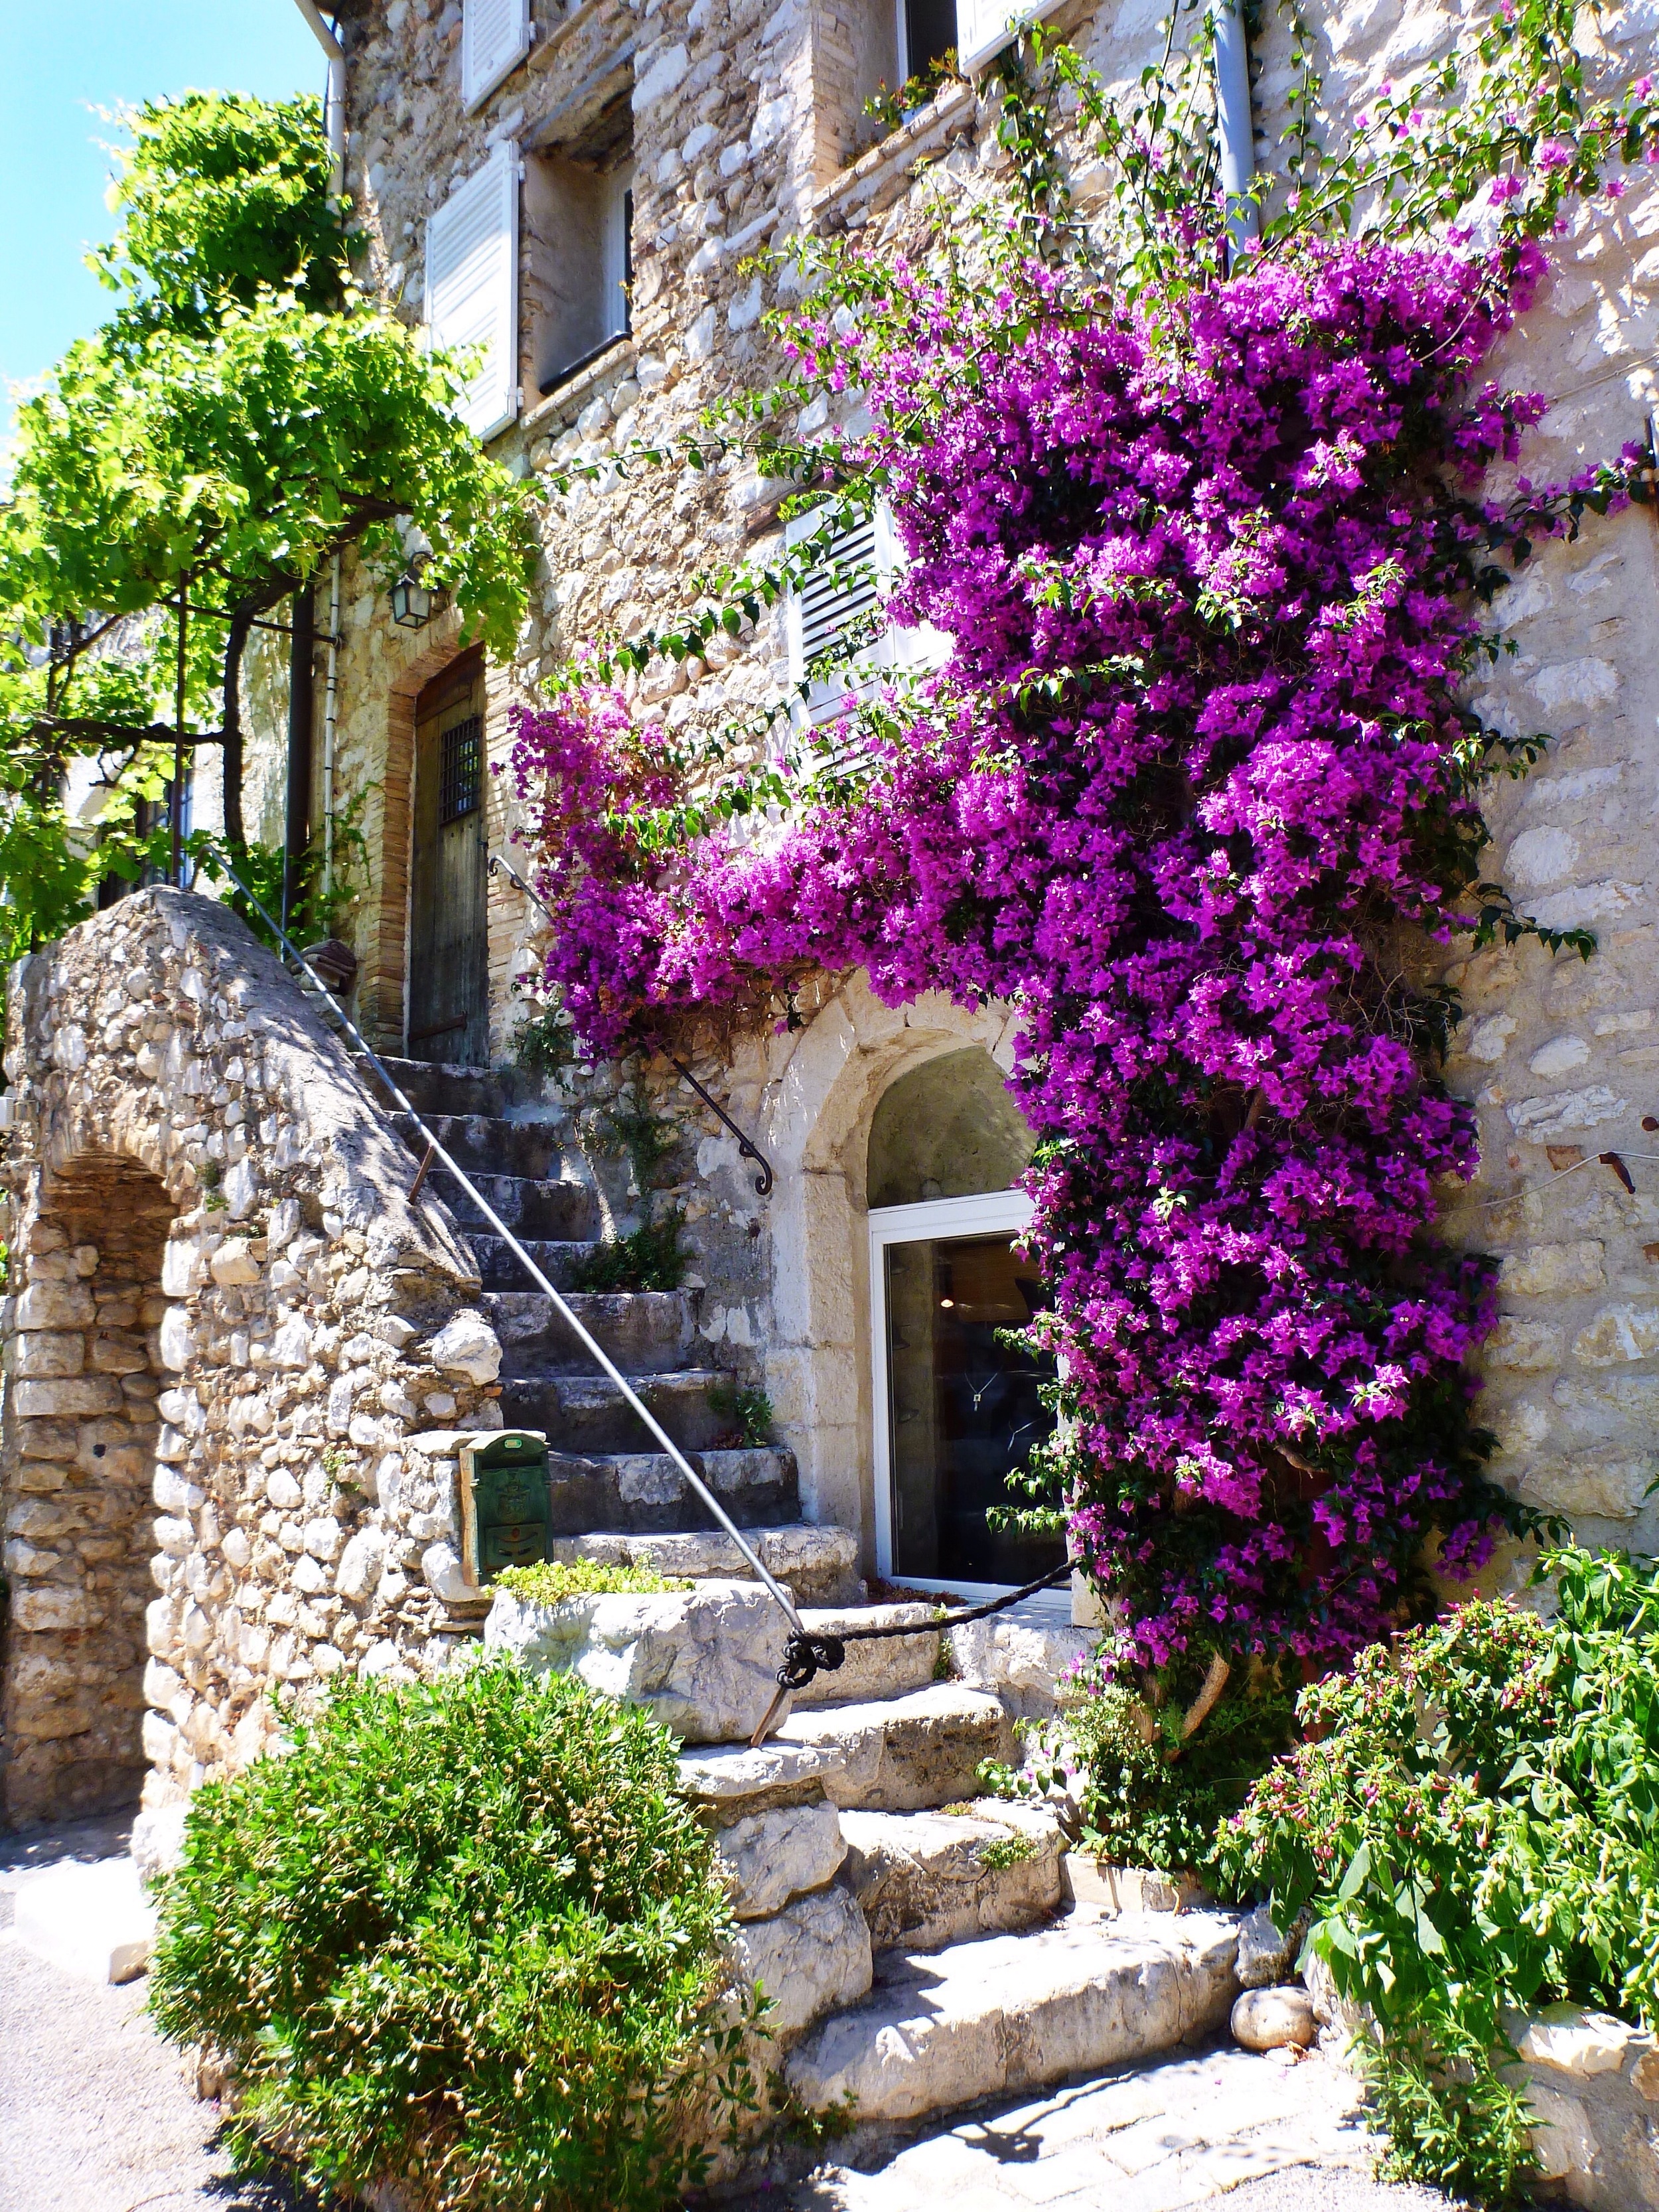 Old Building and flowers - St. Paul de Vence - Côte d'Azur - South of France (French Riviera)